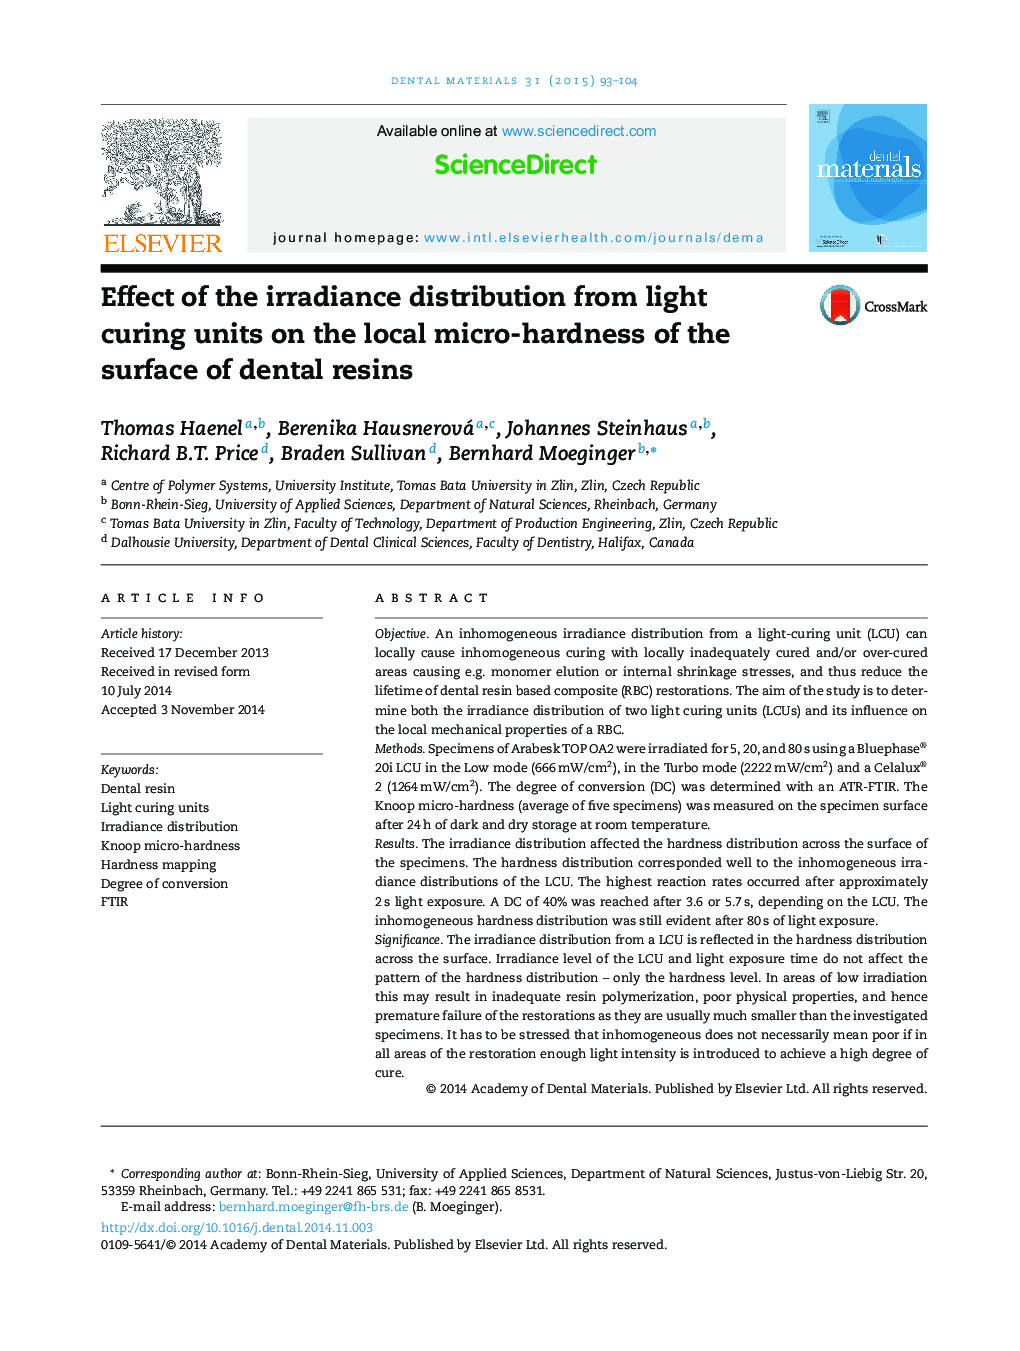 Effect of the irradiance distribution from light curing units on the local micro-hardness of the surface of dental resins